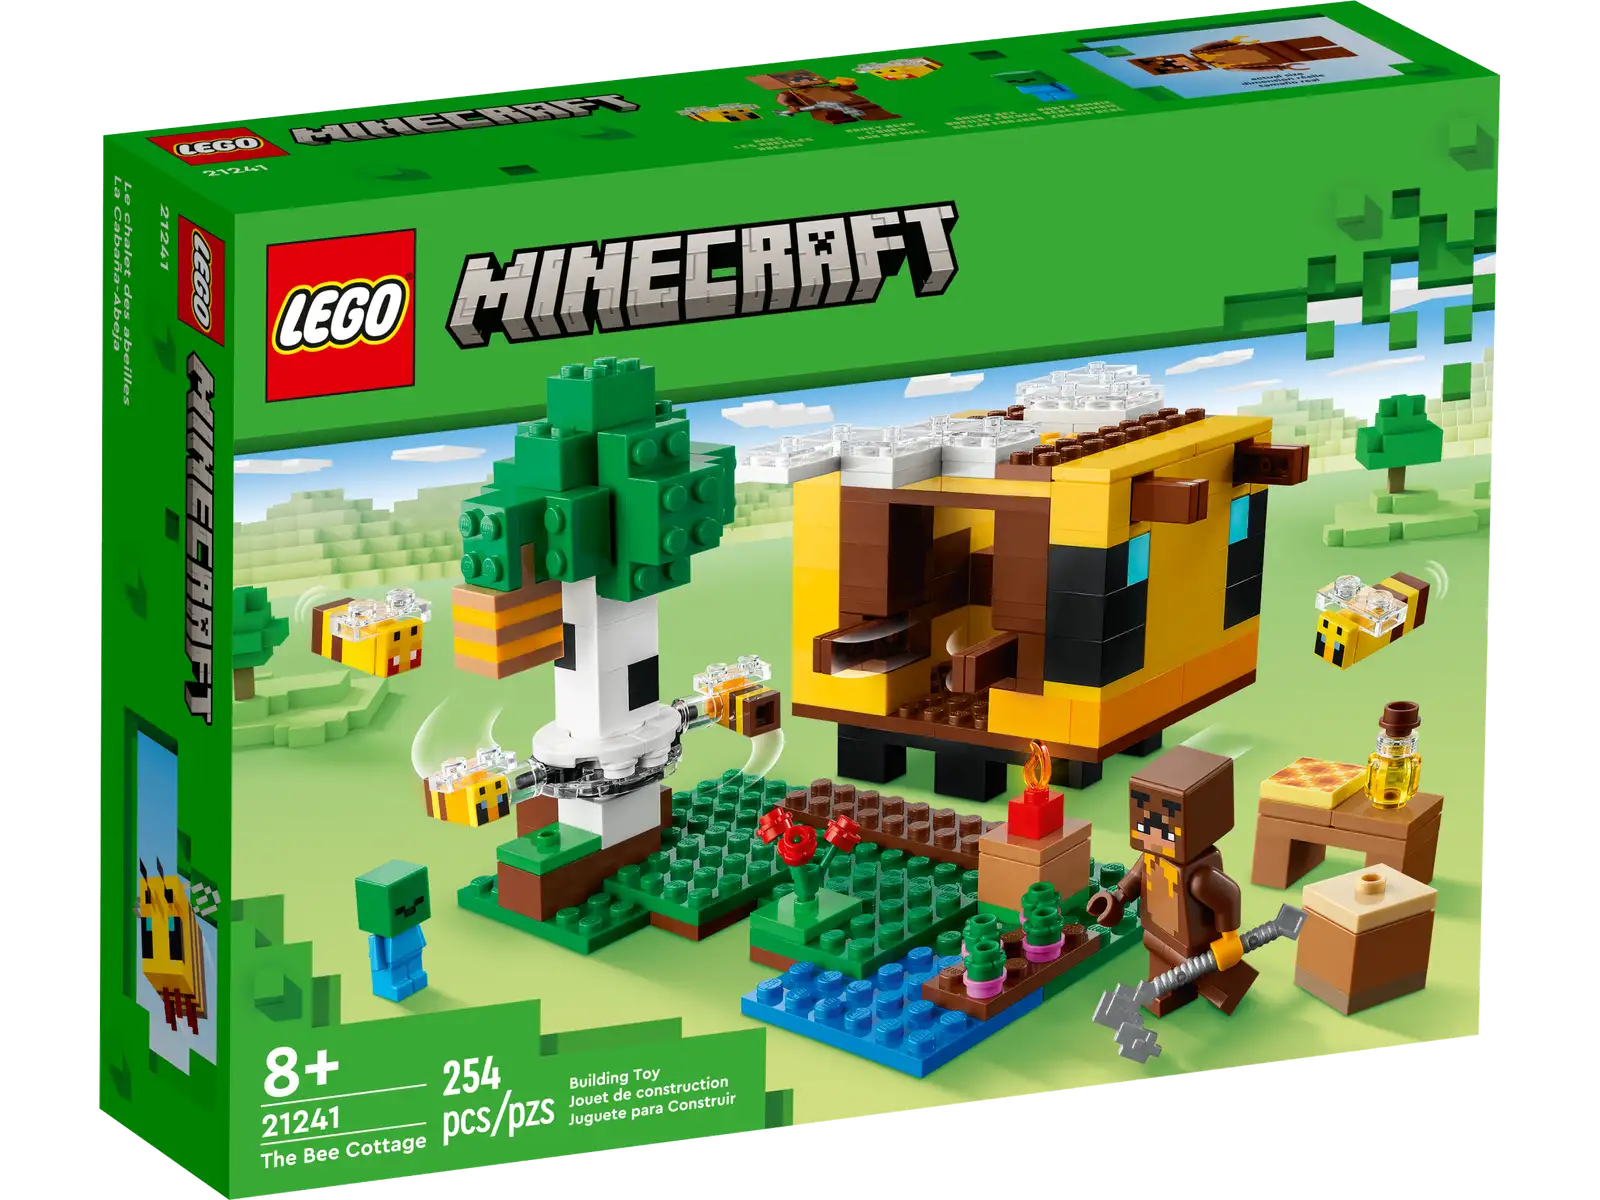 Minecraft® players aged 8 and up will be buzzing with excitement when they get their hands on LEGO® Minecraft The Bee Cottage (21241). This fun toy is packed with endless play possibilities both inside and out. Action-packed set featuring Minecraft’s iconic bees Players use their creative Minecraft building skills to construct a bee-shaped house. A removable roof provides easy access to the interior. Outside, there’s honeycomb to harvest from the beehive, crops to grow at the farm and hostile mobs to defend against. The set includes a Honey Bear player character, baby zombie, 3 bees and 1 angry bee. Features include 2 bees that race around a tree with the flick of a finger. For added digital fun, the LEGO Builder app features intuitive zoom and rotate tools that let kids visualize their model as they build. Minecraft® action – LEGO® Minecraft The Bee Cottage (21241) is packed with hands-on adventures that take players’ experience of the popular video game to a whole new level Classic characters – Includes a Honey Bear player character, baby zombie, 3 bees and 1 angry bee, plus fun features and accessories Fun-packed playset – Kids harvest honeycomb from the beehive, grow crops on a farm and battle a baby zombie as they build a bee-shaped base for their Minecraft® adventures Gift for kids – Give this versatile, buildable playset as a birthday, holiday or any-day treat for Minecraft® players aged 8 and up Play and display – The constructed model measures over 4 in. (10 cm) high, 5.5 in. (14 cm) wide and 3 in. (8 cm) deep Interactive digital building – The LEGO® Builder app features intuitive zoom and rotate tools that let kids visualize their model as they build Minecraft® made real – LEGO® Minecraft sets give kids a different way to enjoy the popular game, with mobs, scenes and features brought to life with the hands-on creativity of LEGO bricks Quality guaranteed – LEGO® components fulfill stringent industry quality standards to ensure they are consistent, compatible and connect smoothly every time Safety assured – LEGO® components are dropped, heated, crushed, twisted and analyzed to make sure they satisfy rigorous global safety standards